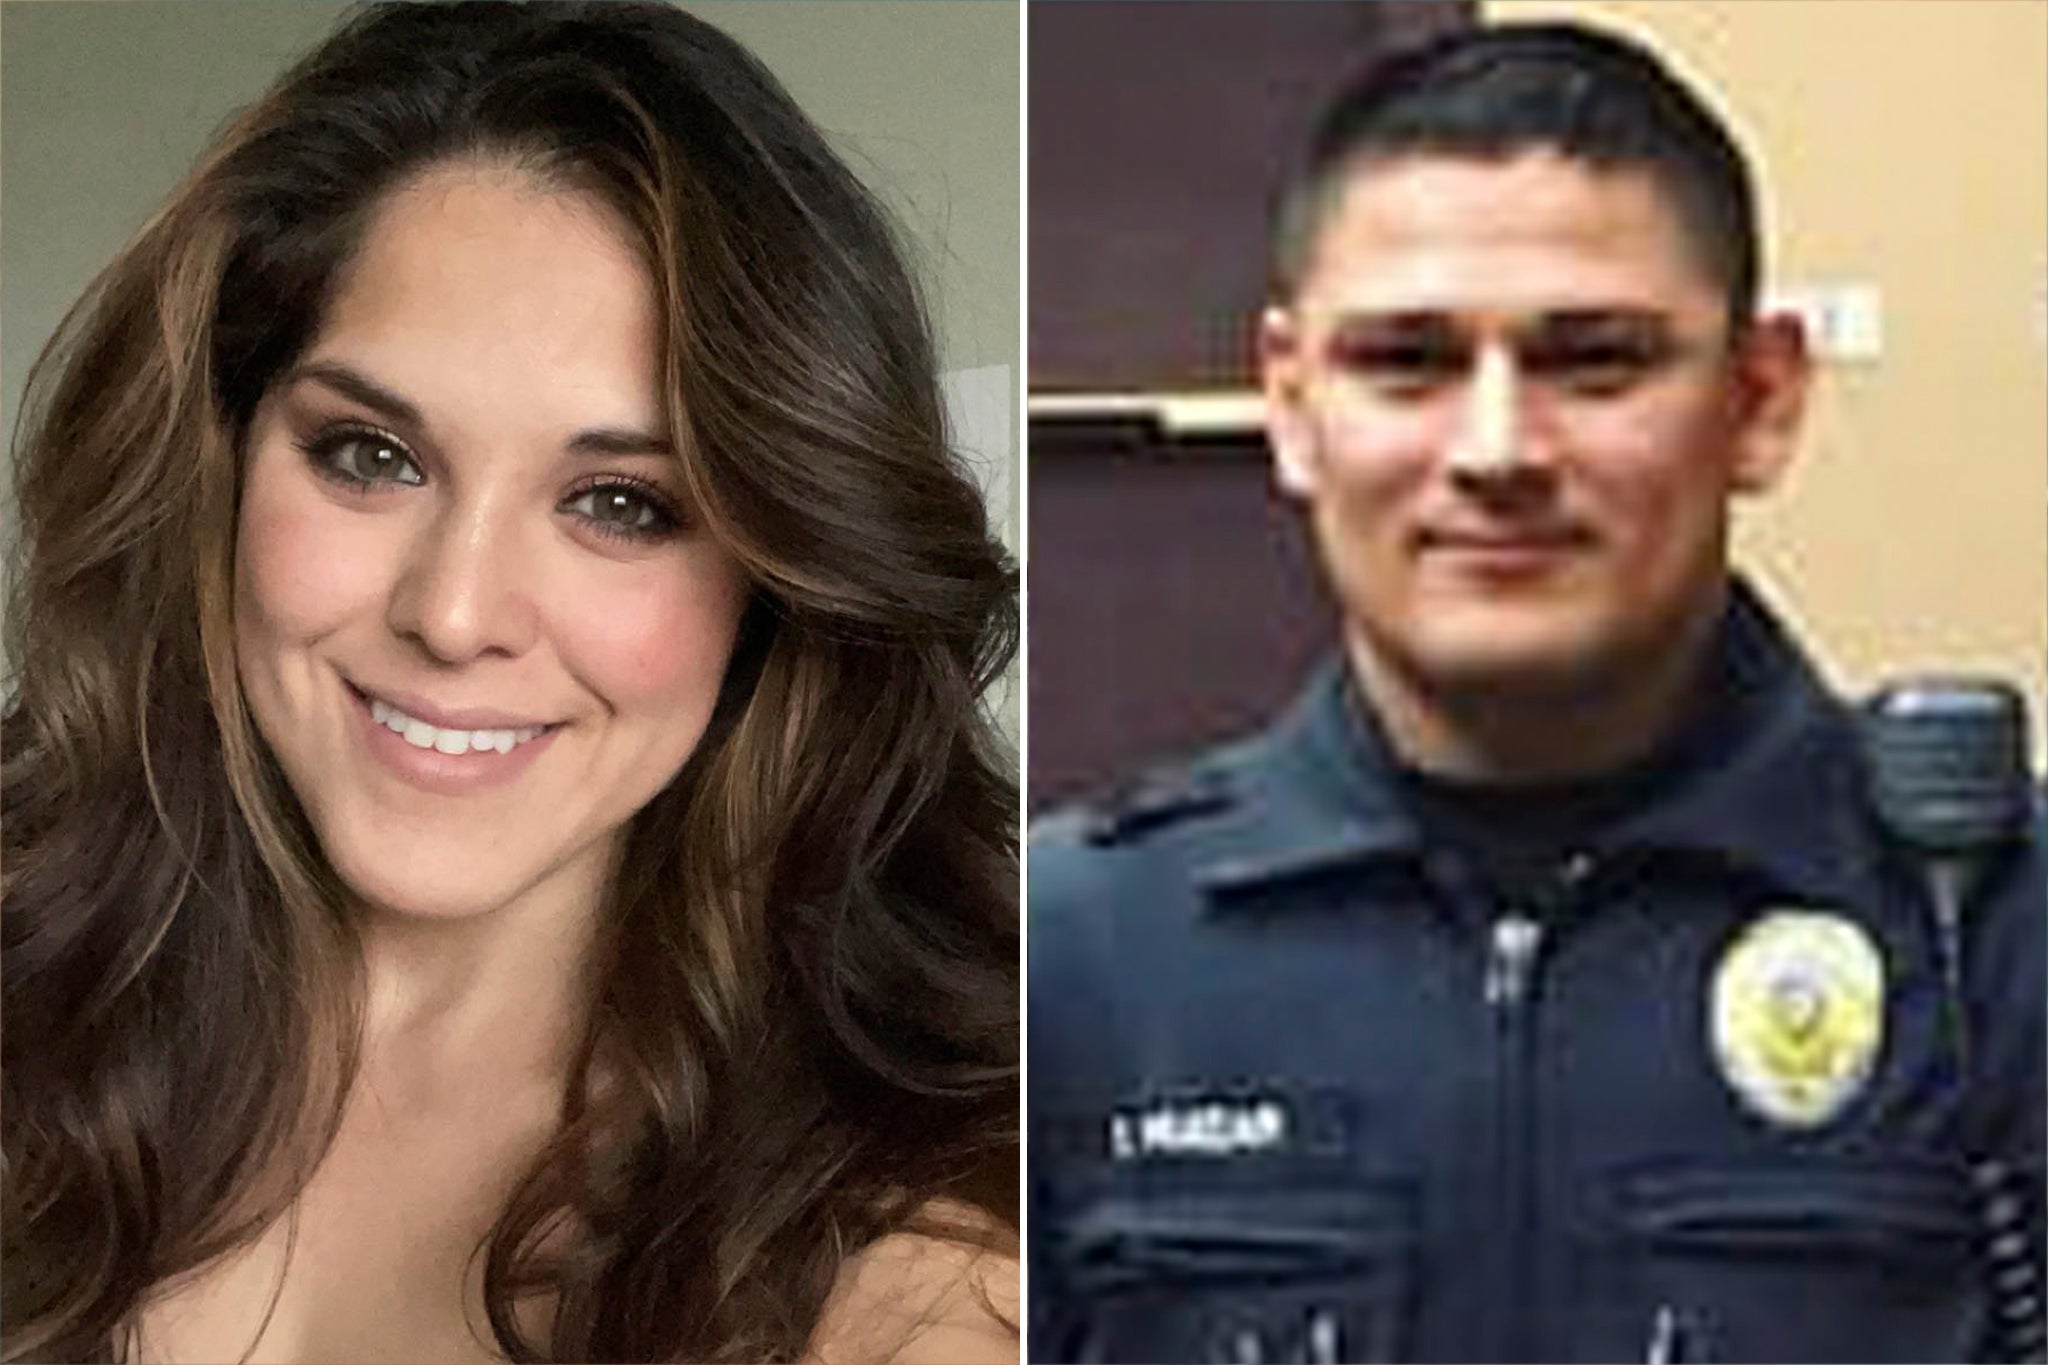 Amber Marie Rodriguez was ‘terrified’ of her ex-husband Elias Huizar, who killed her in West Richland, Washington